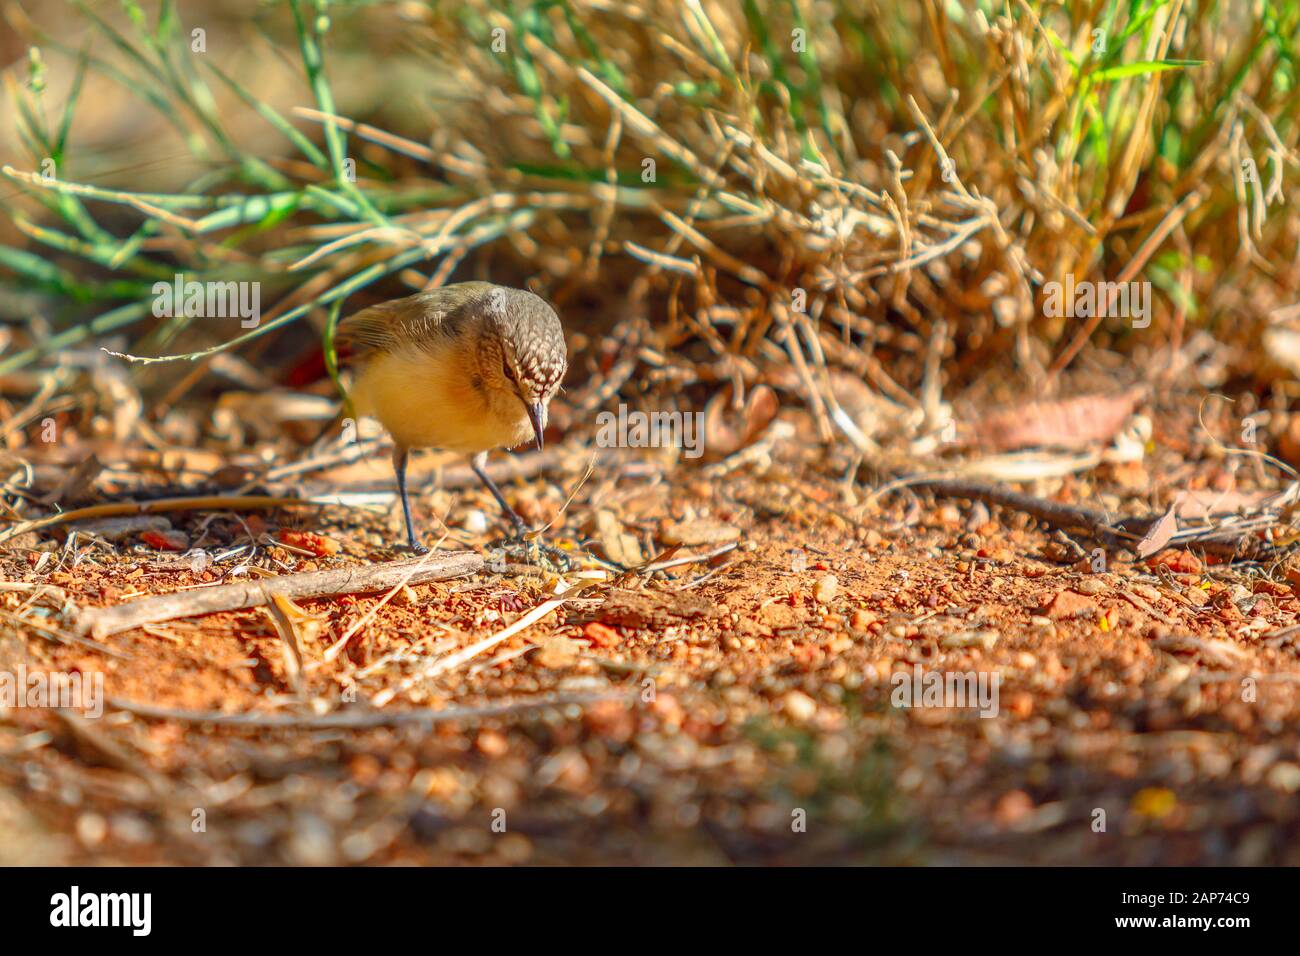 The brown thornbill, Acanthiza pusilla, a passerine bird, resting on the ground in the undergrowth. Desert Park at Alice Springs, MacDonnell Ranges in Stock Photo